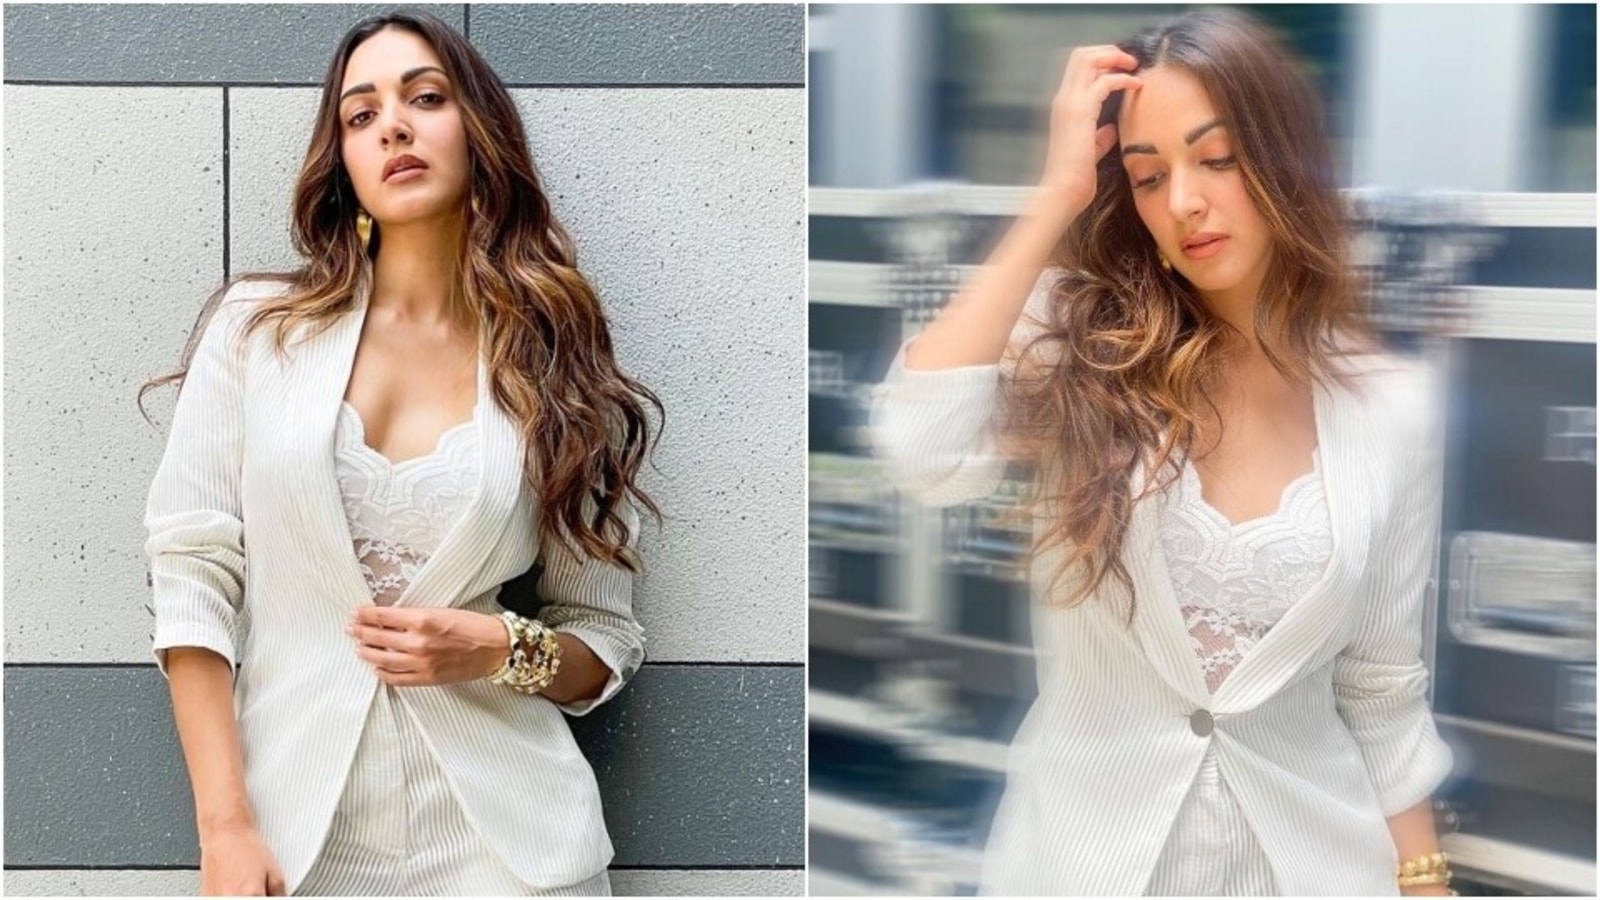 Shershaah actor Kiara Advani adds sexy charm to boss lady look in white  pantsuit, lacy top | Fashion Trends - Hindustan Times